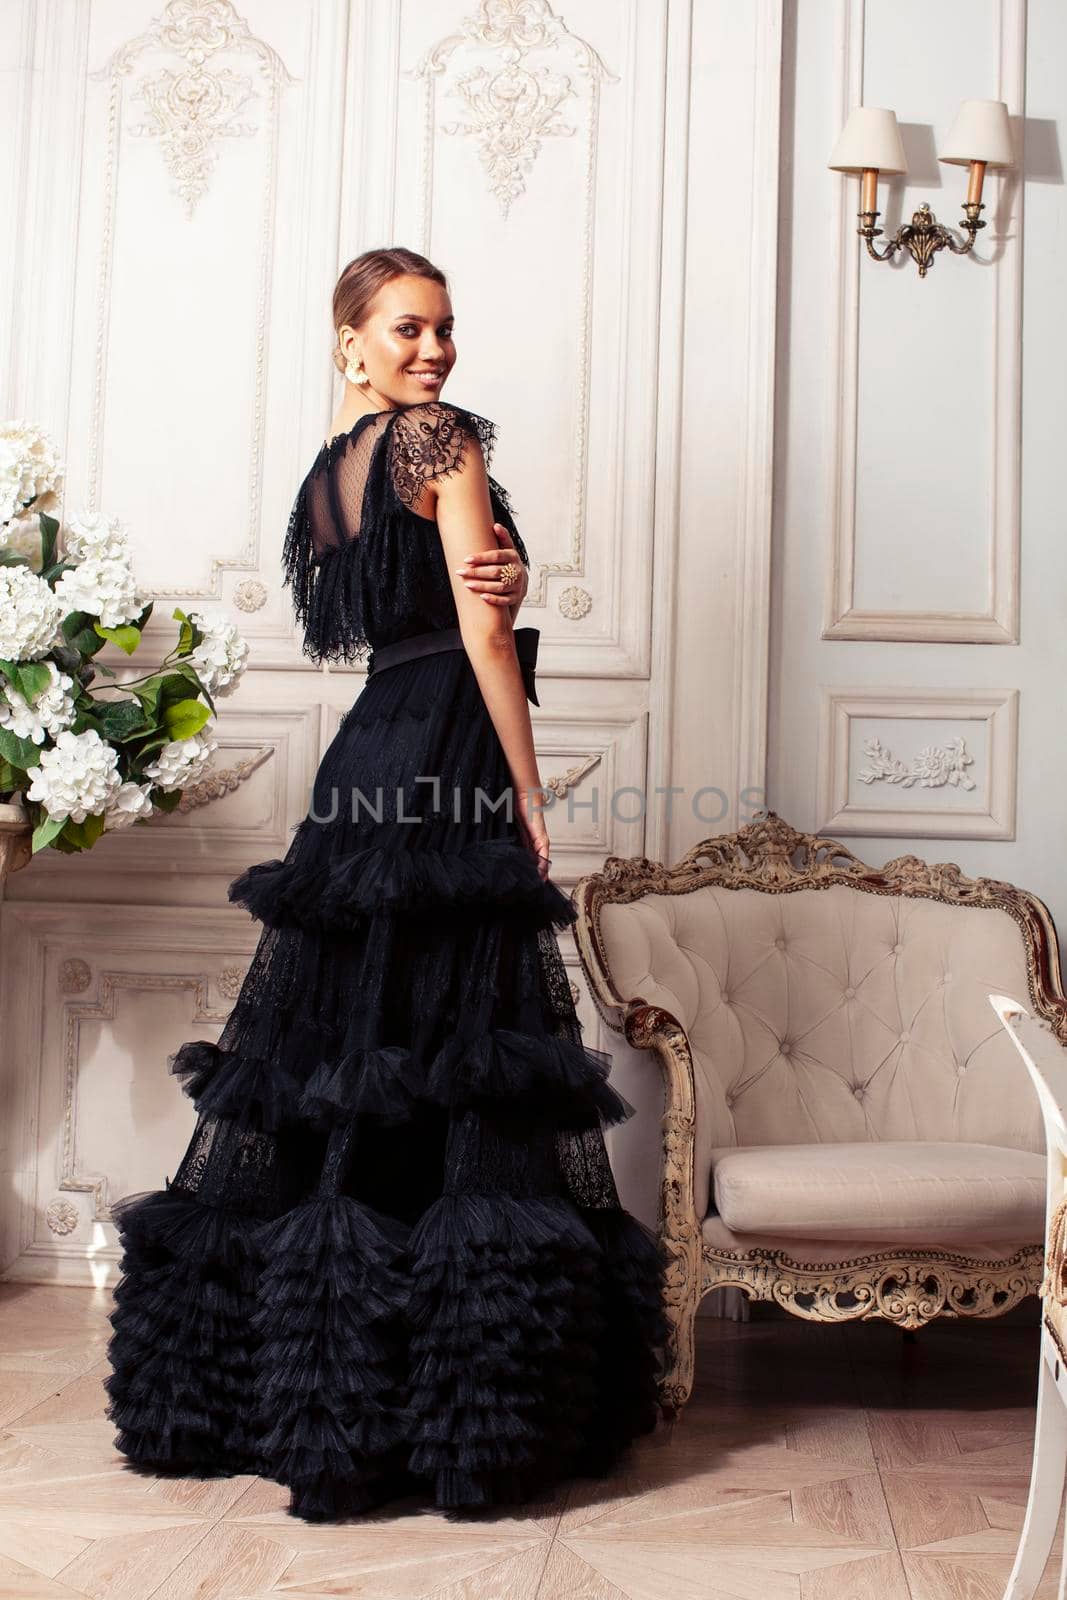 young pretty lady in black lace fashion style dress posing in rich interior of royal hotel room, luxury lifestyle people concept close up